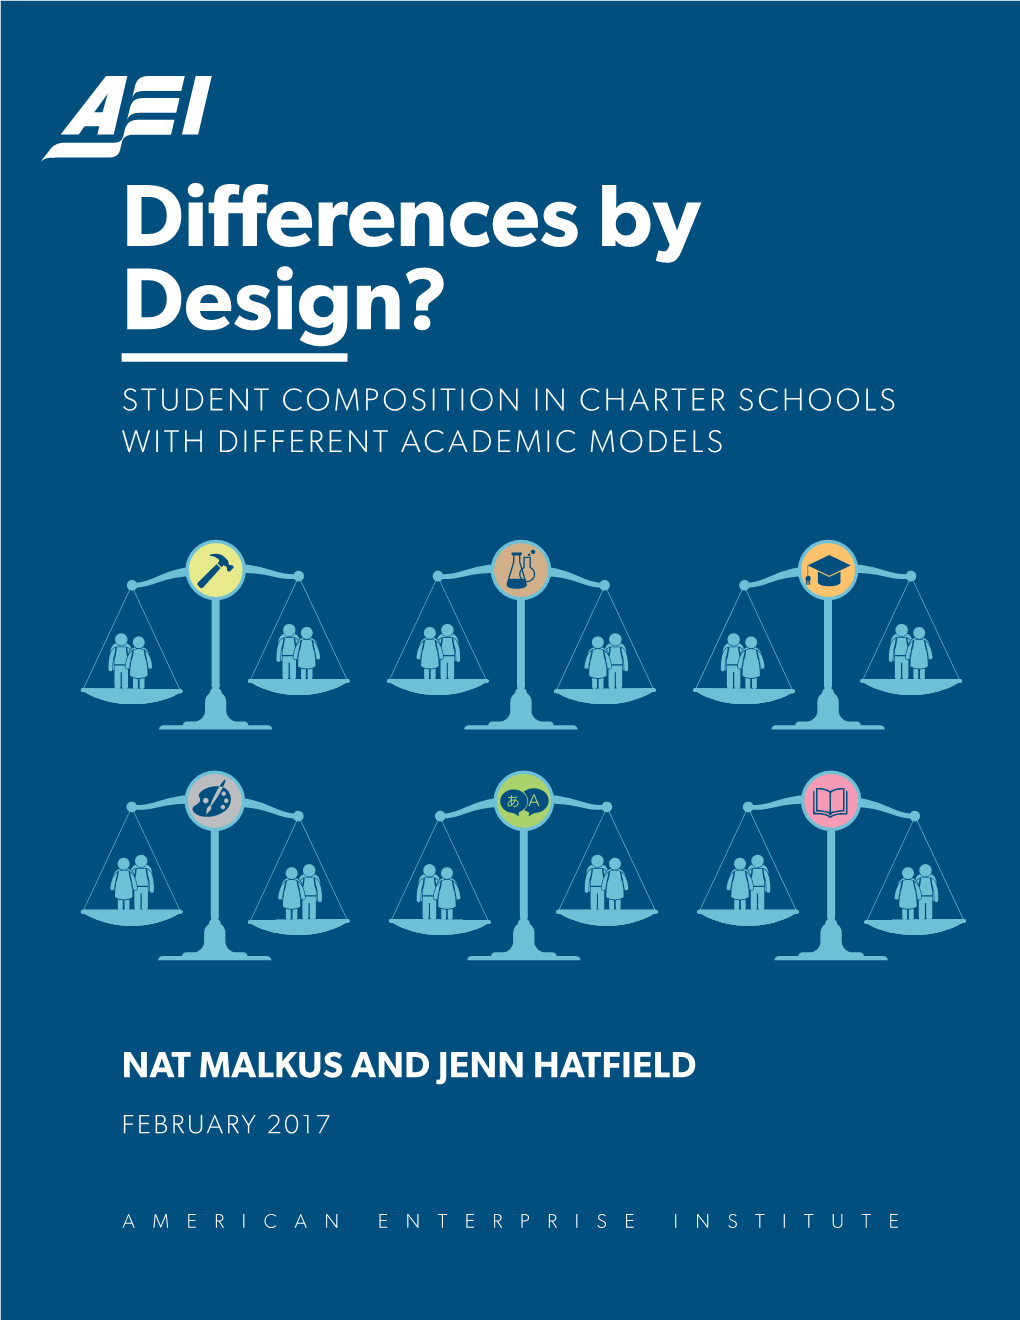 Differences by Design? Student Composition in Charter Schools with Different Academic Models